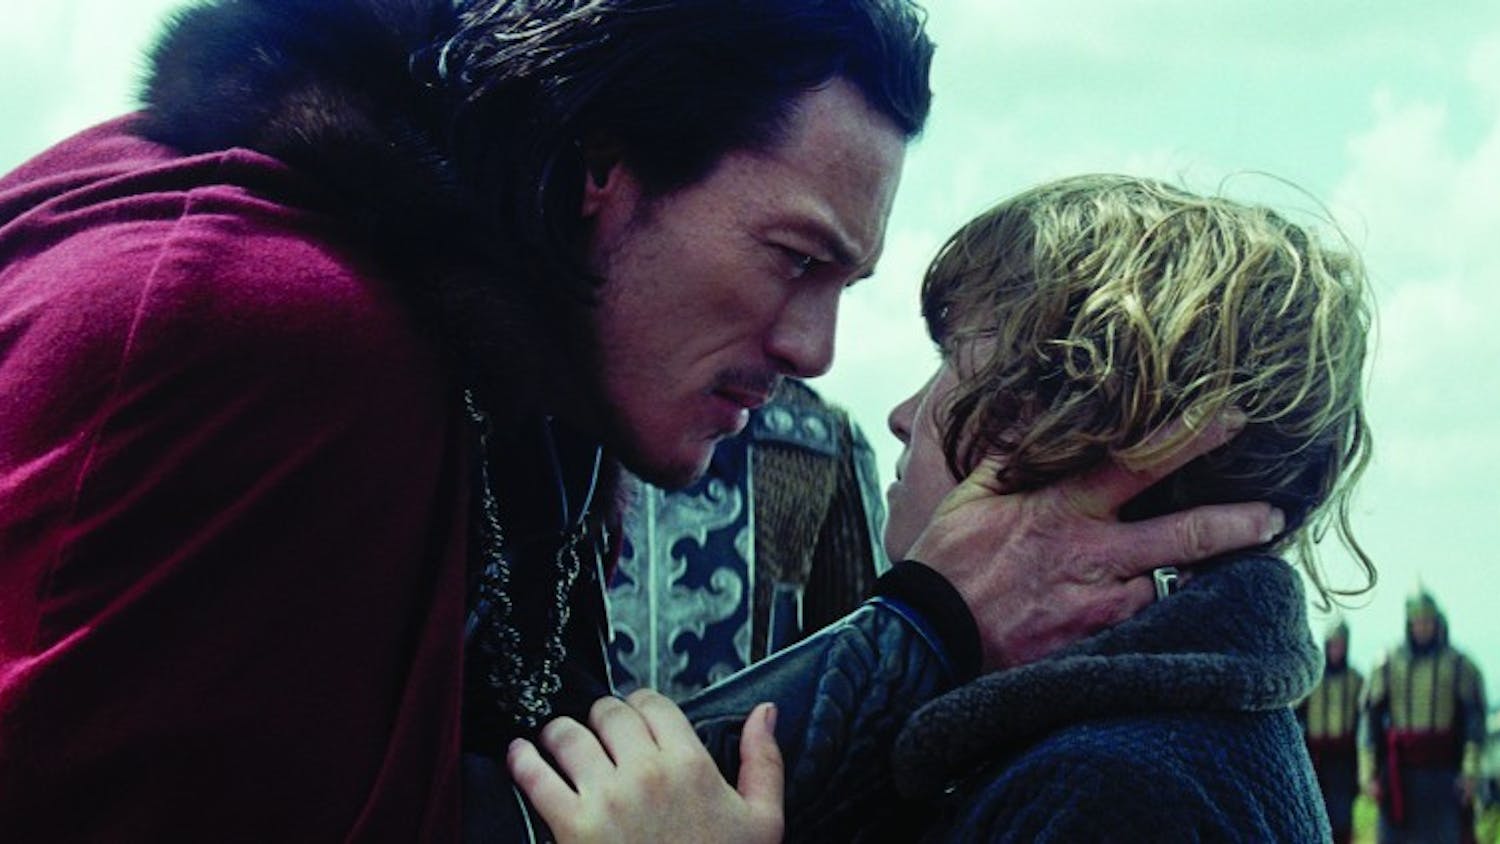 Vlad (LUKE EVANS) warns his son, Ingeras (ART PARKINSON), to run in ?Dracula Untold?, the origin story of the man who became Dracula.  Gary Shore directs and Michael De Luca produces the epic action-adventure.  